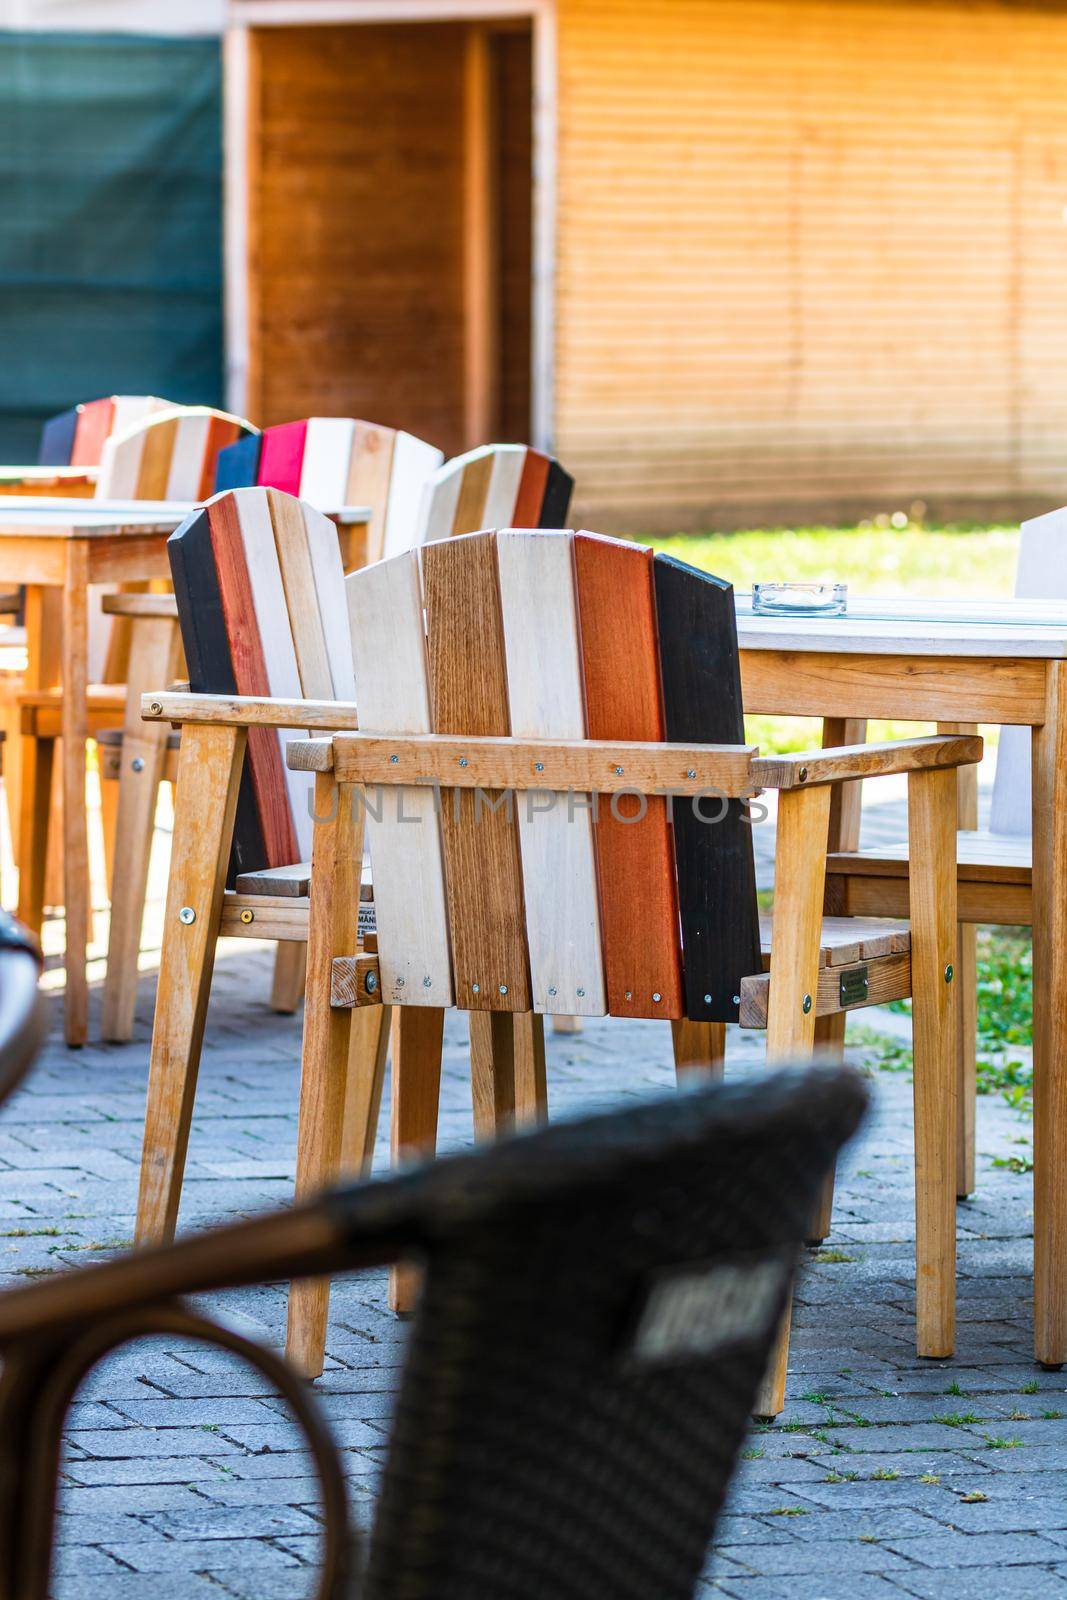  Close up of an empty table with empty chairs at a local outdoor resturant. Alba Iulia, Romania, 2021 by vladispas